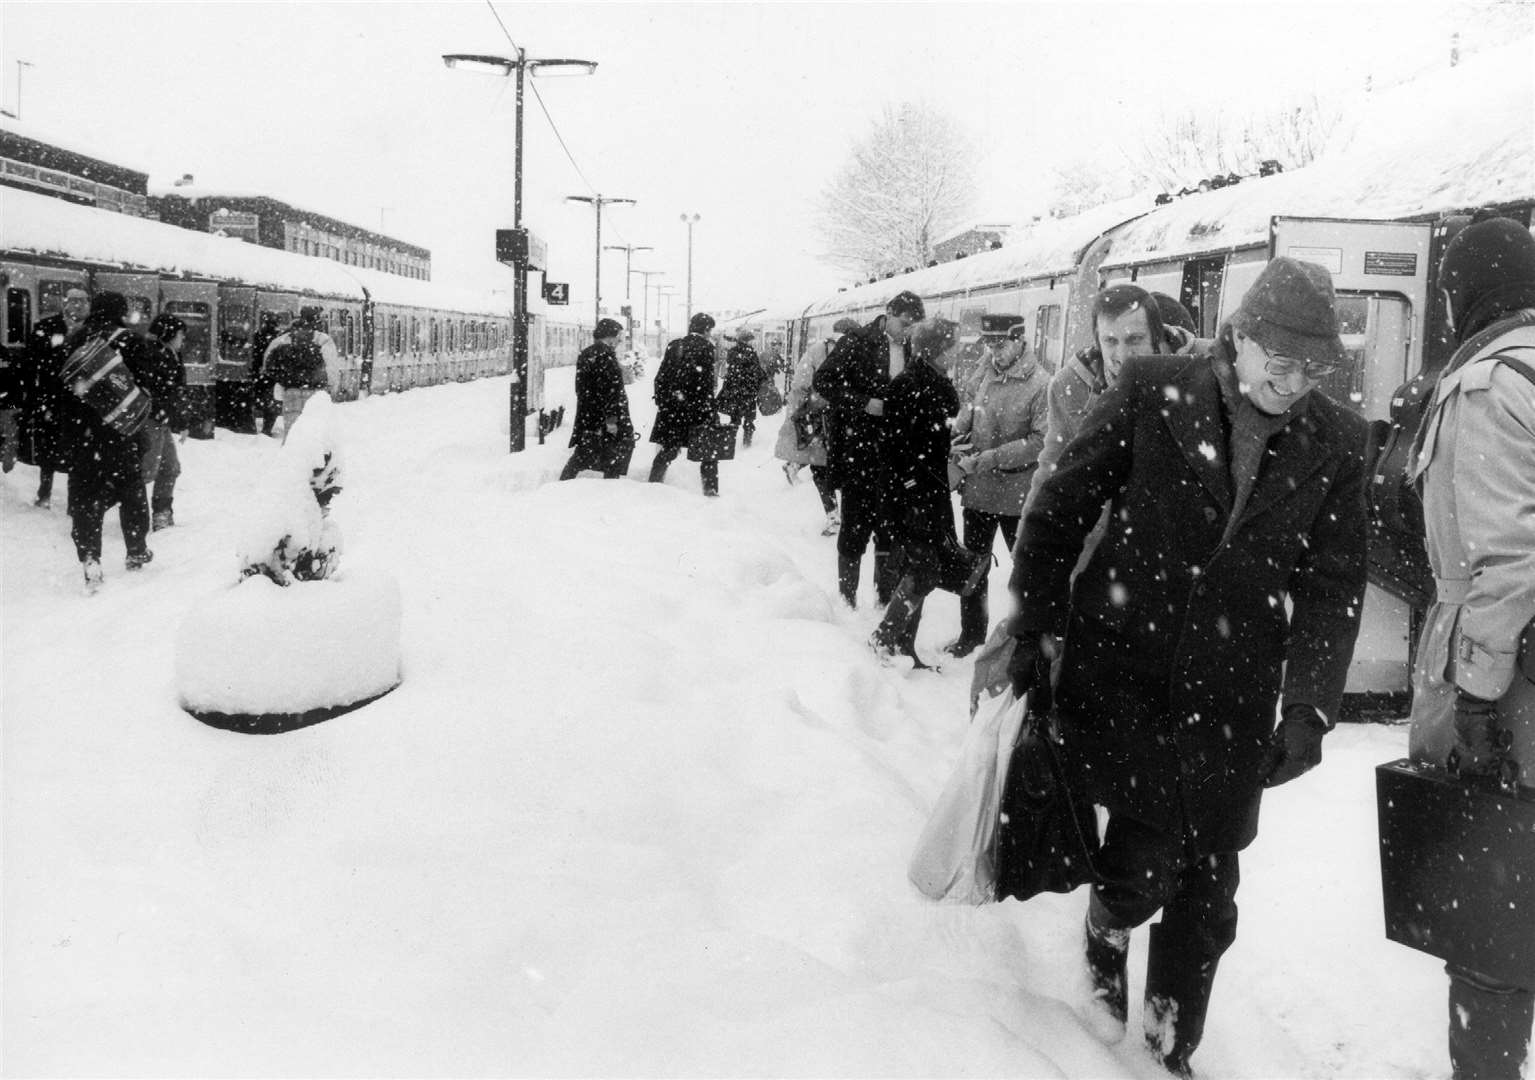 Travel disruption at Gillingham train station after heavy snowfall in January 1987